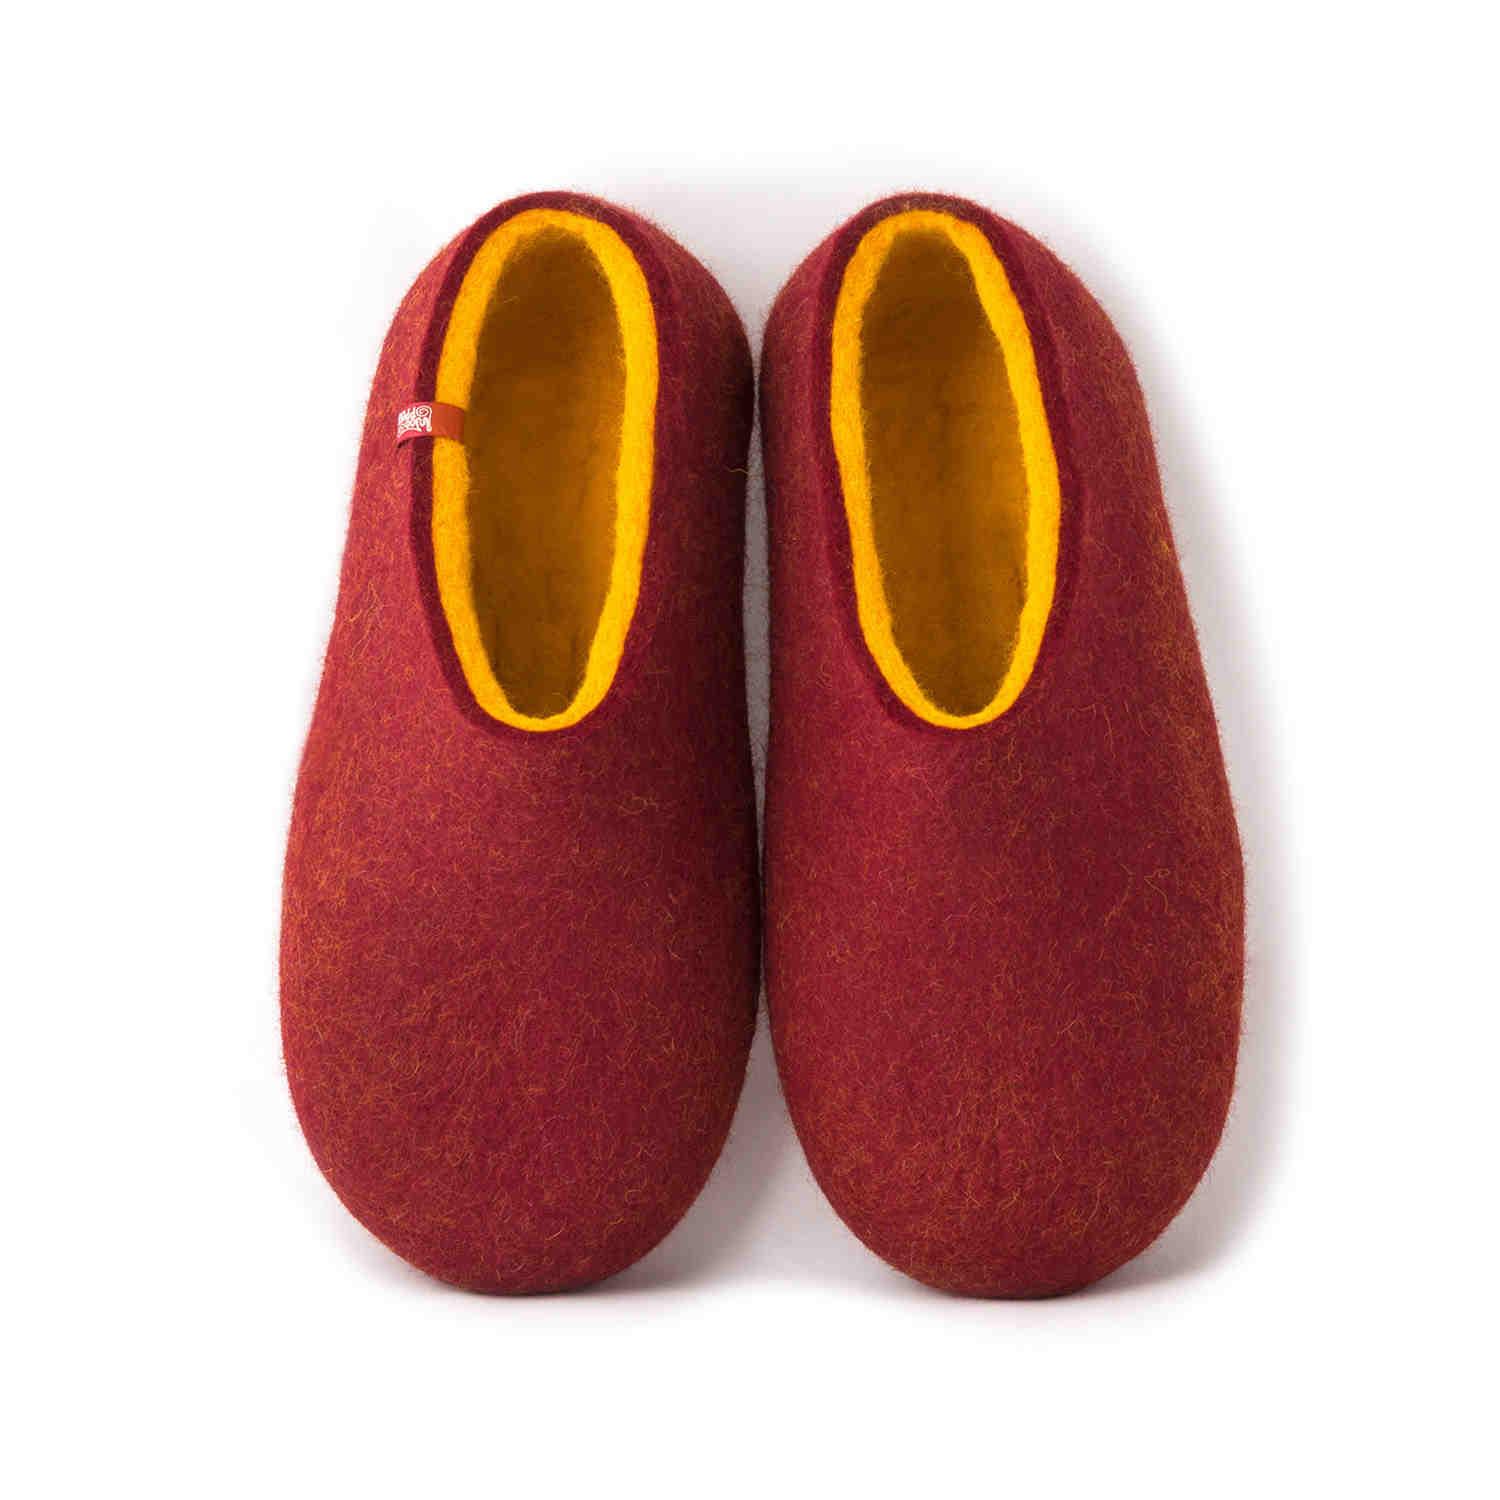 Wooppers felt slippers DUAL RED yellow